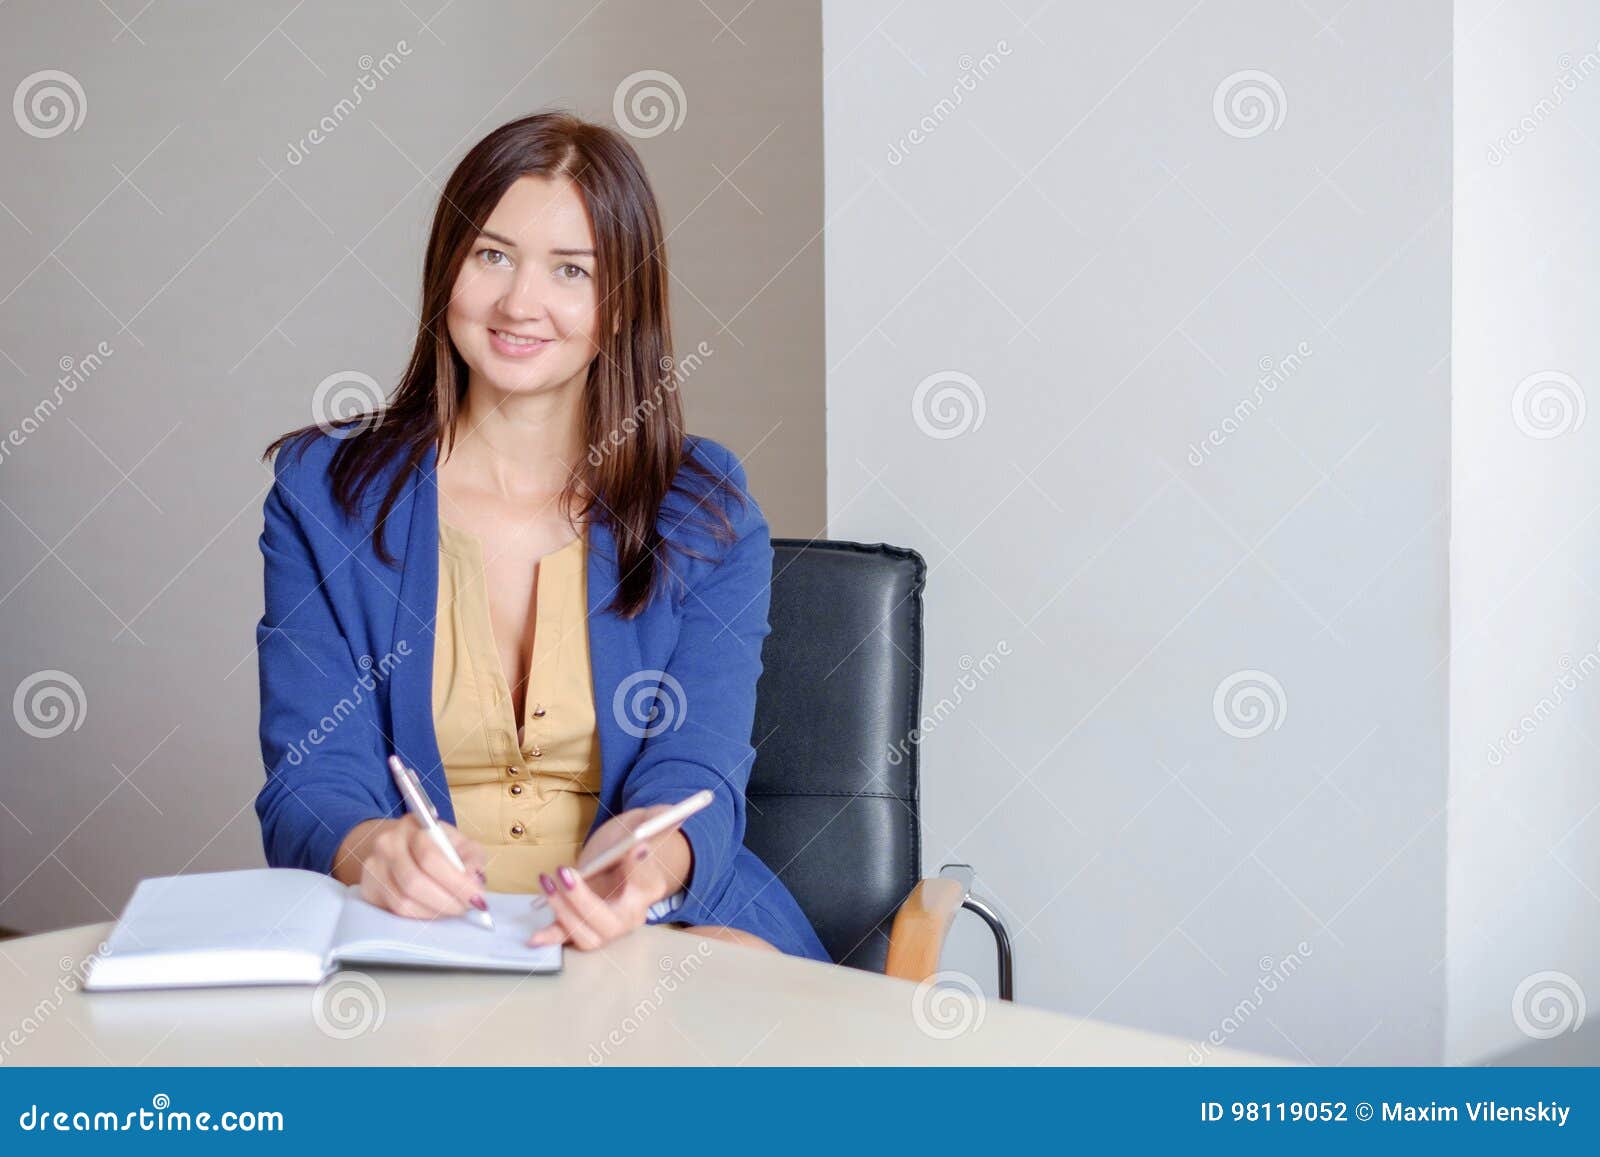 Young Businesswoman Working At Desk In Office Taking Notes Into